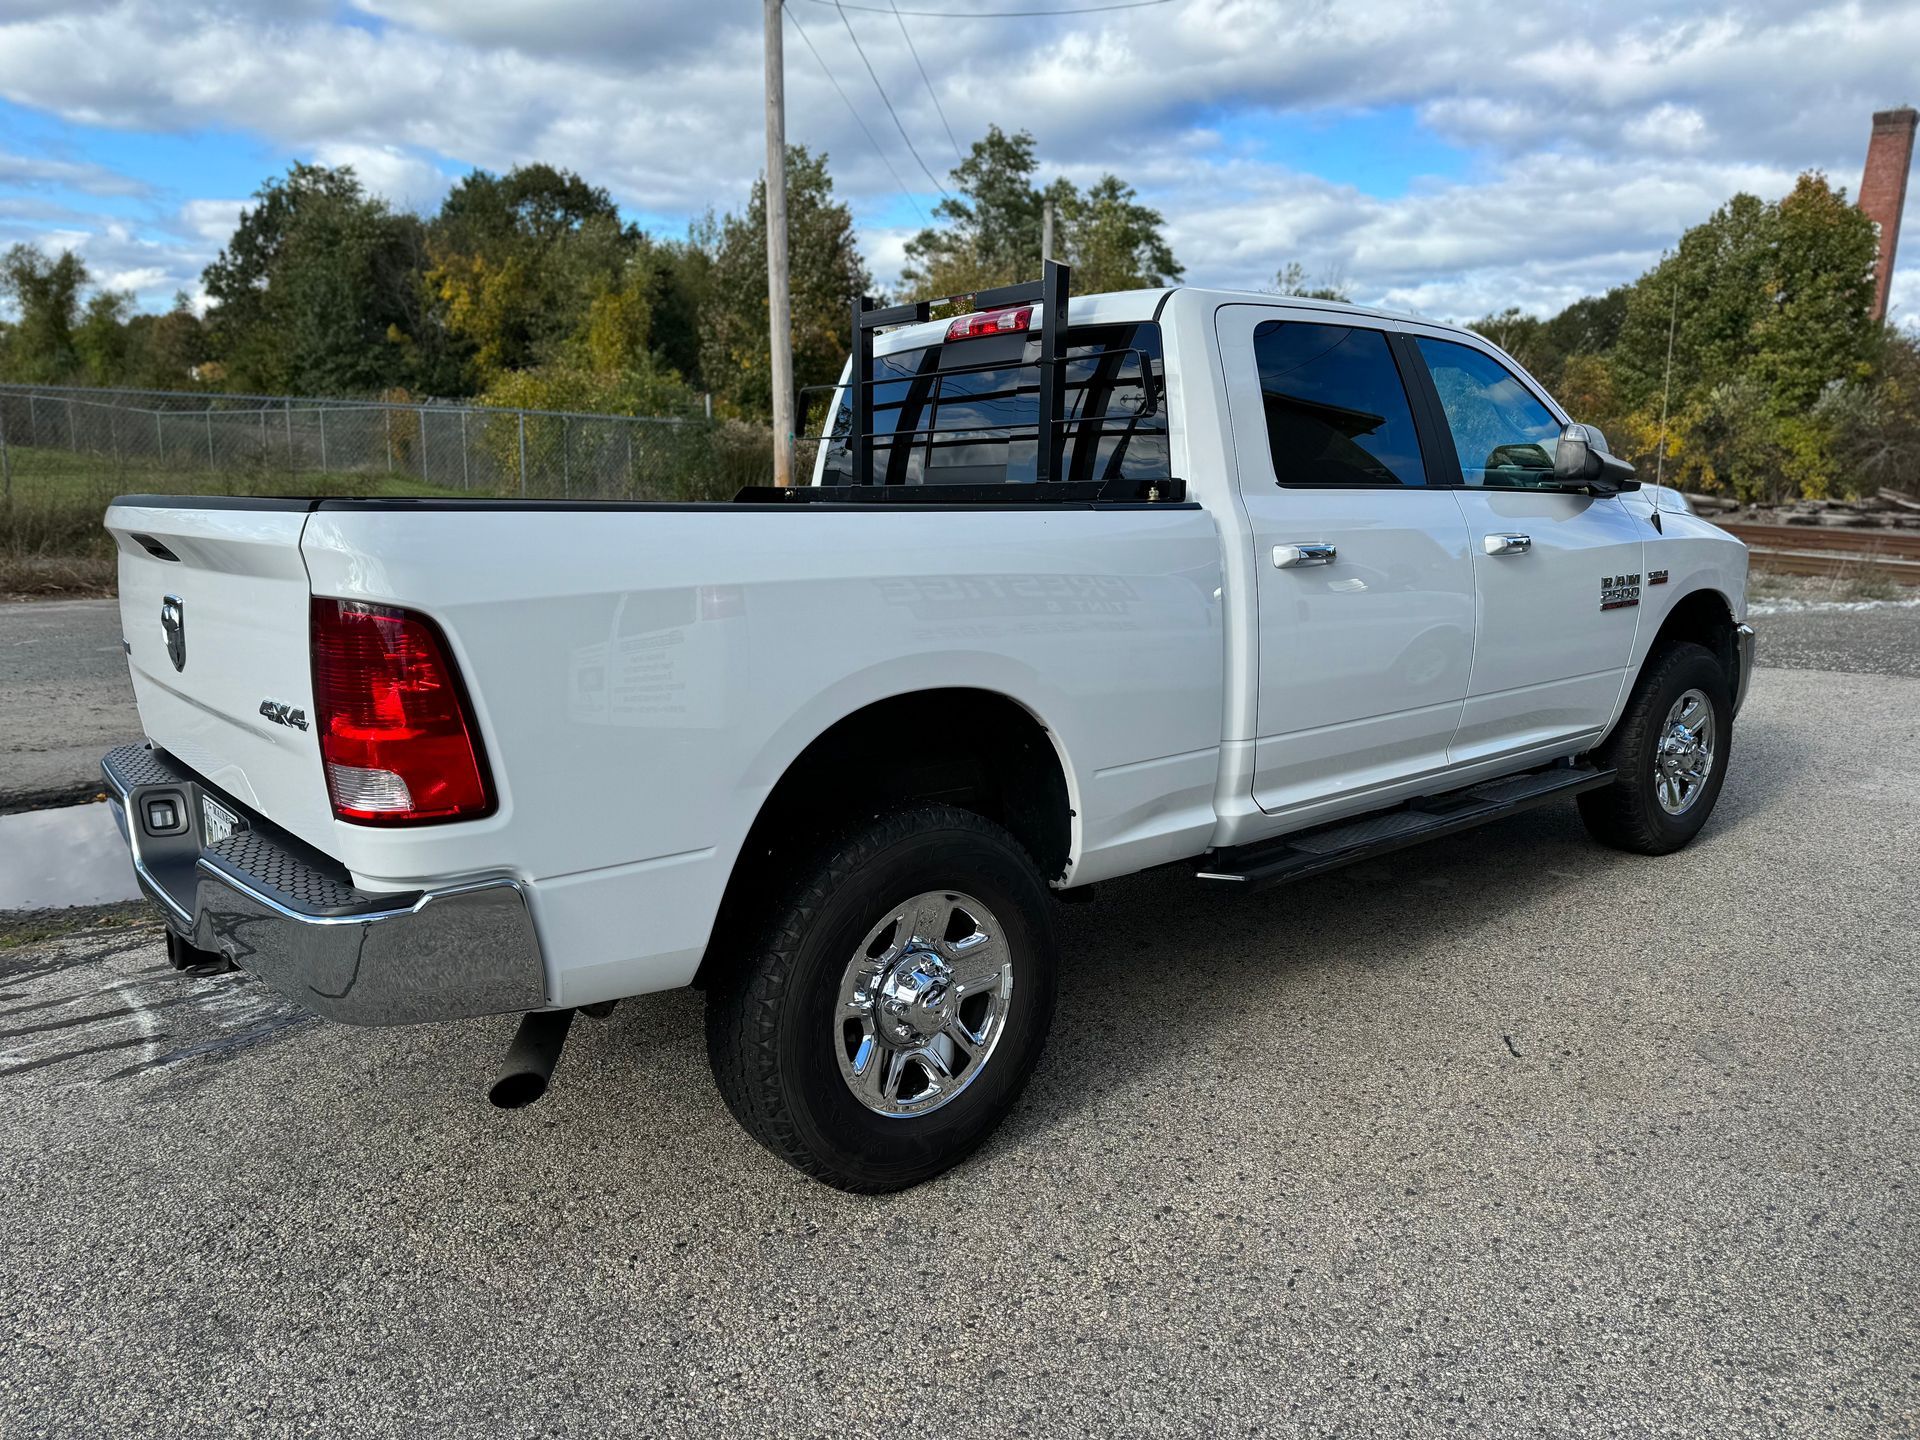 A white dodge ram truck is parked on the side of the road.